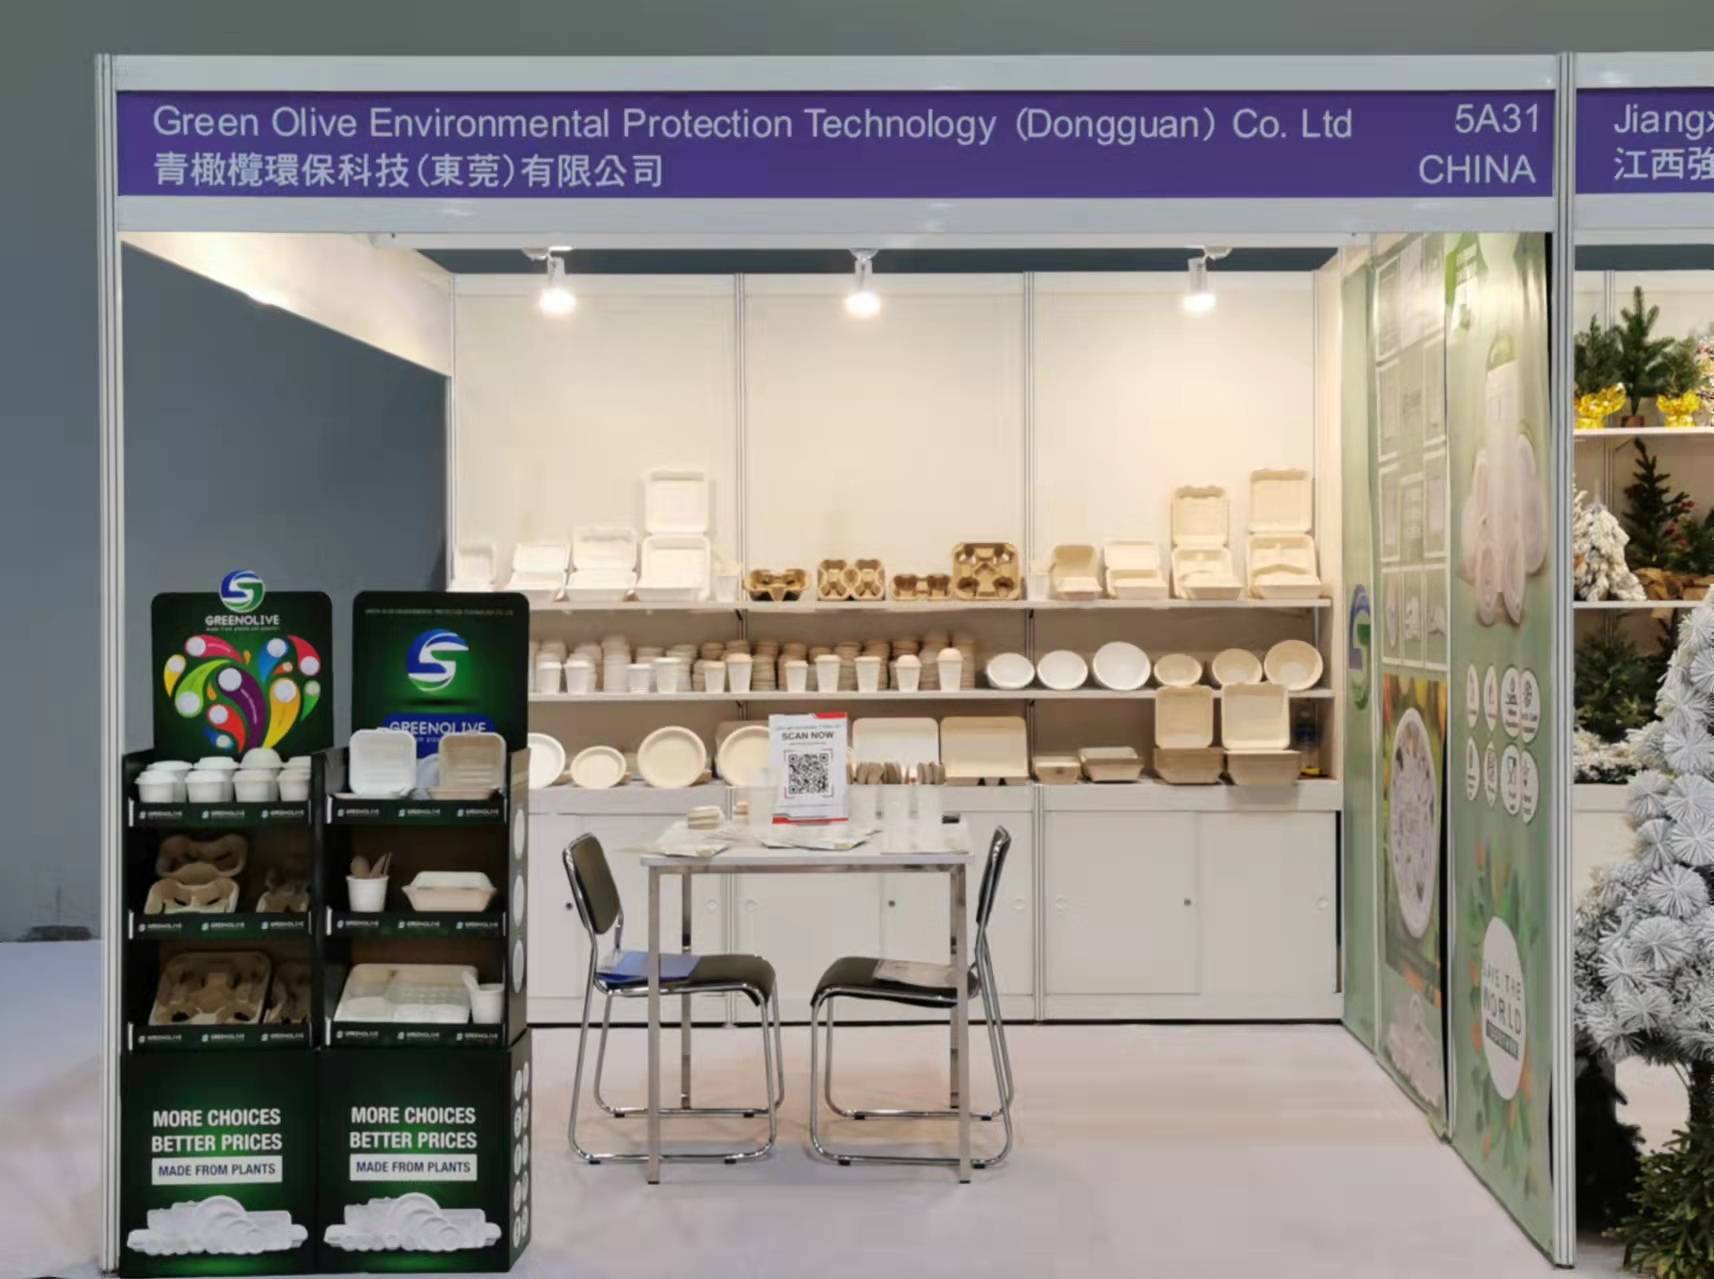 Green Olive was invited to participate in the Global Sources Home and Kitchen Exhibition